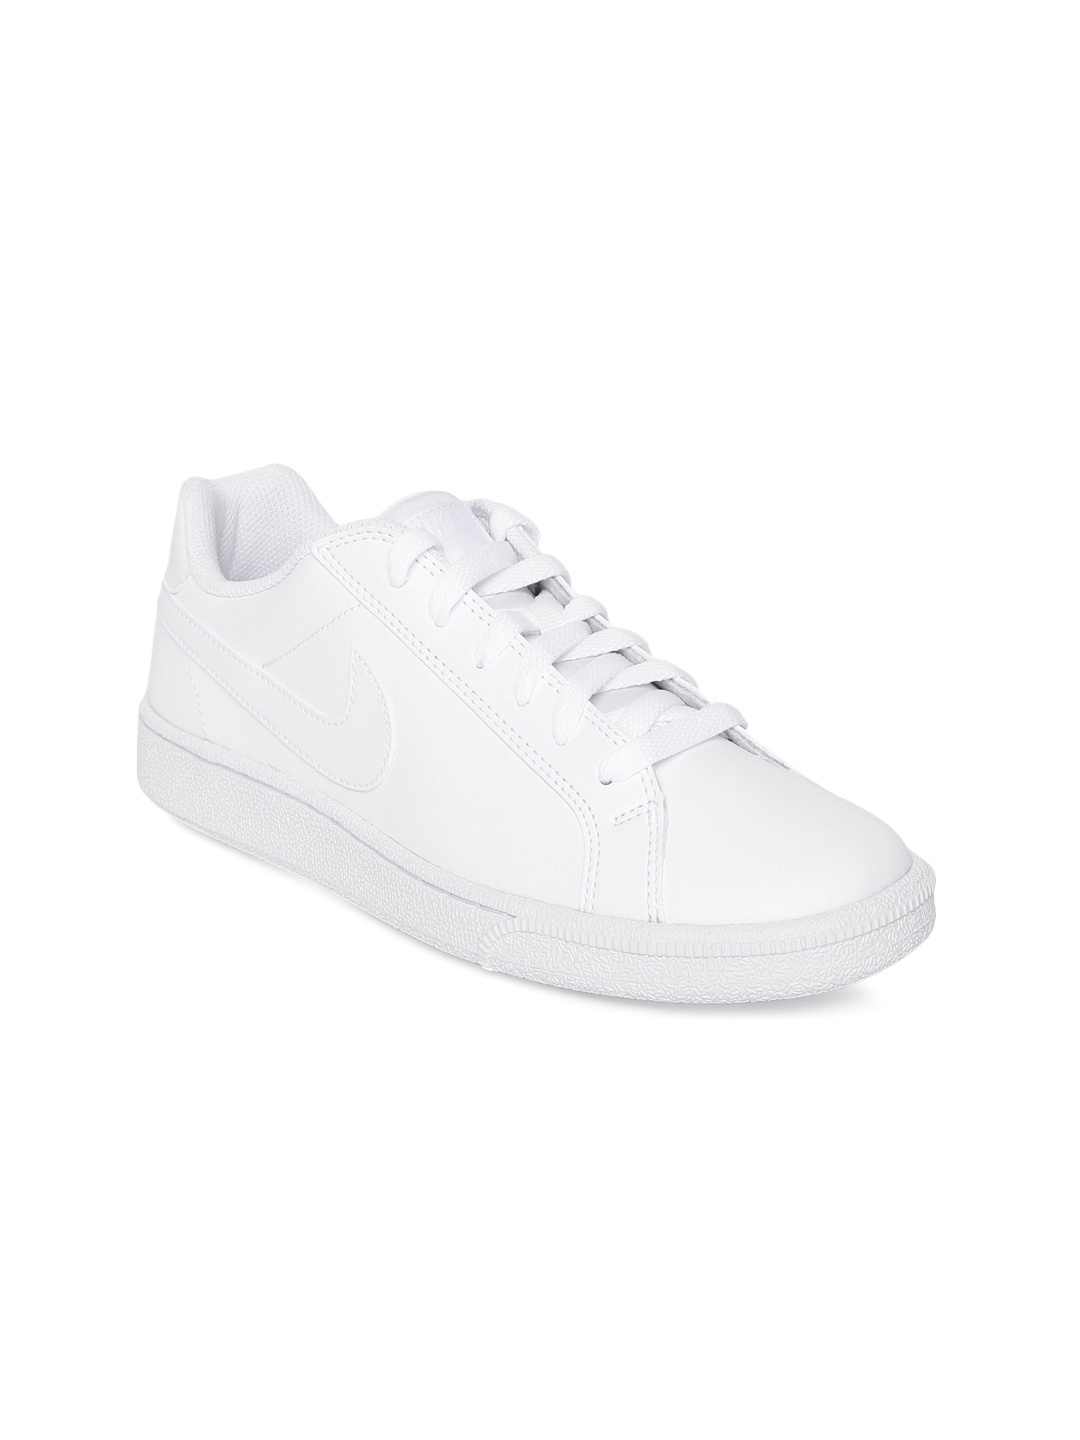 nike white leather tennis shoes